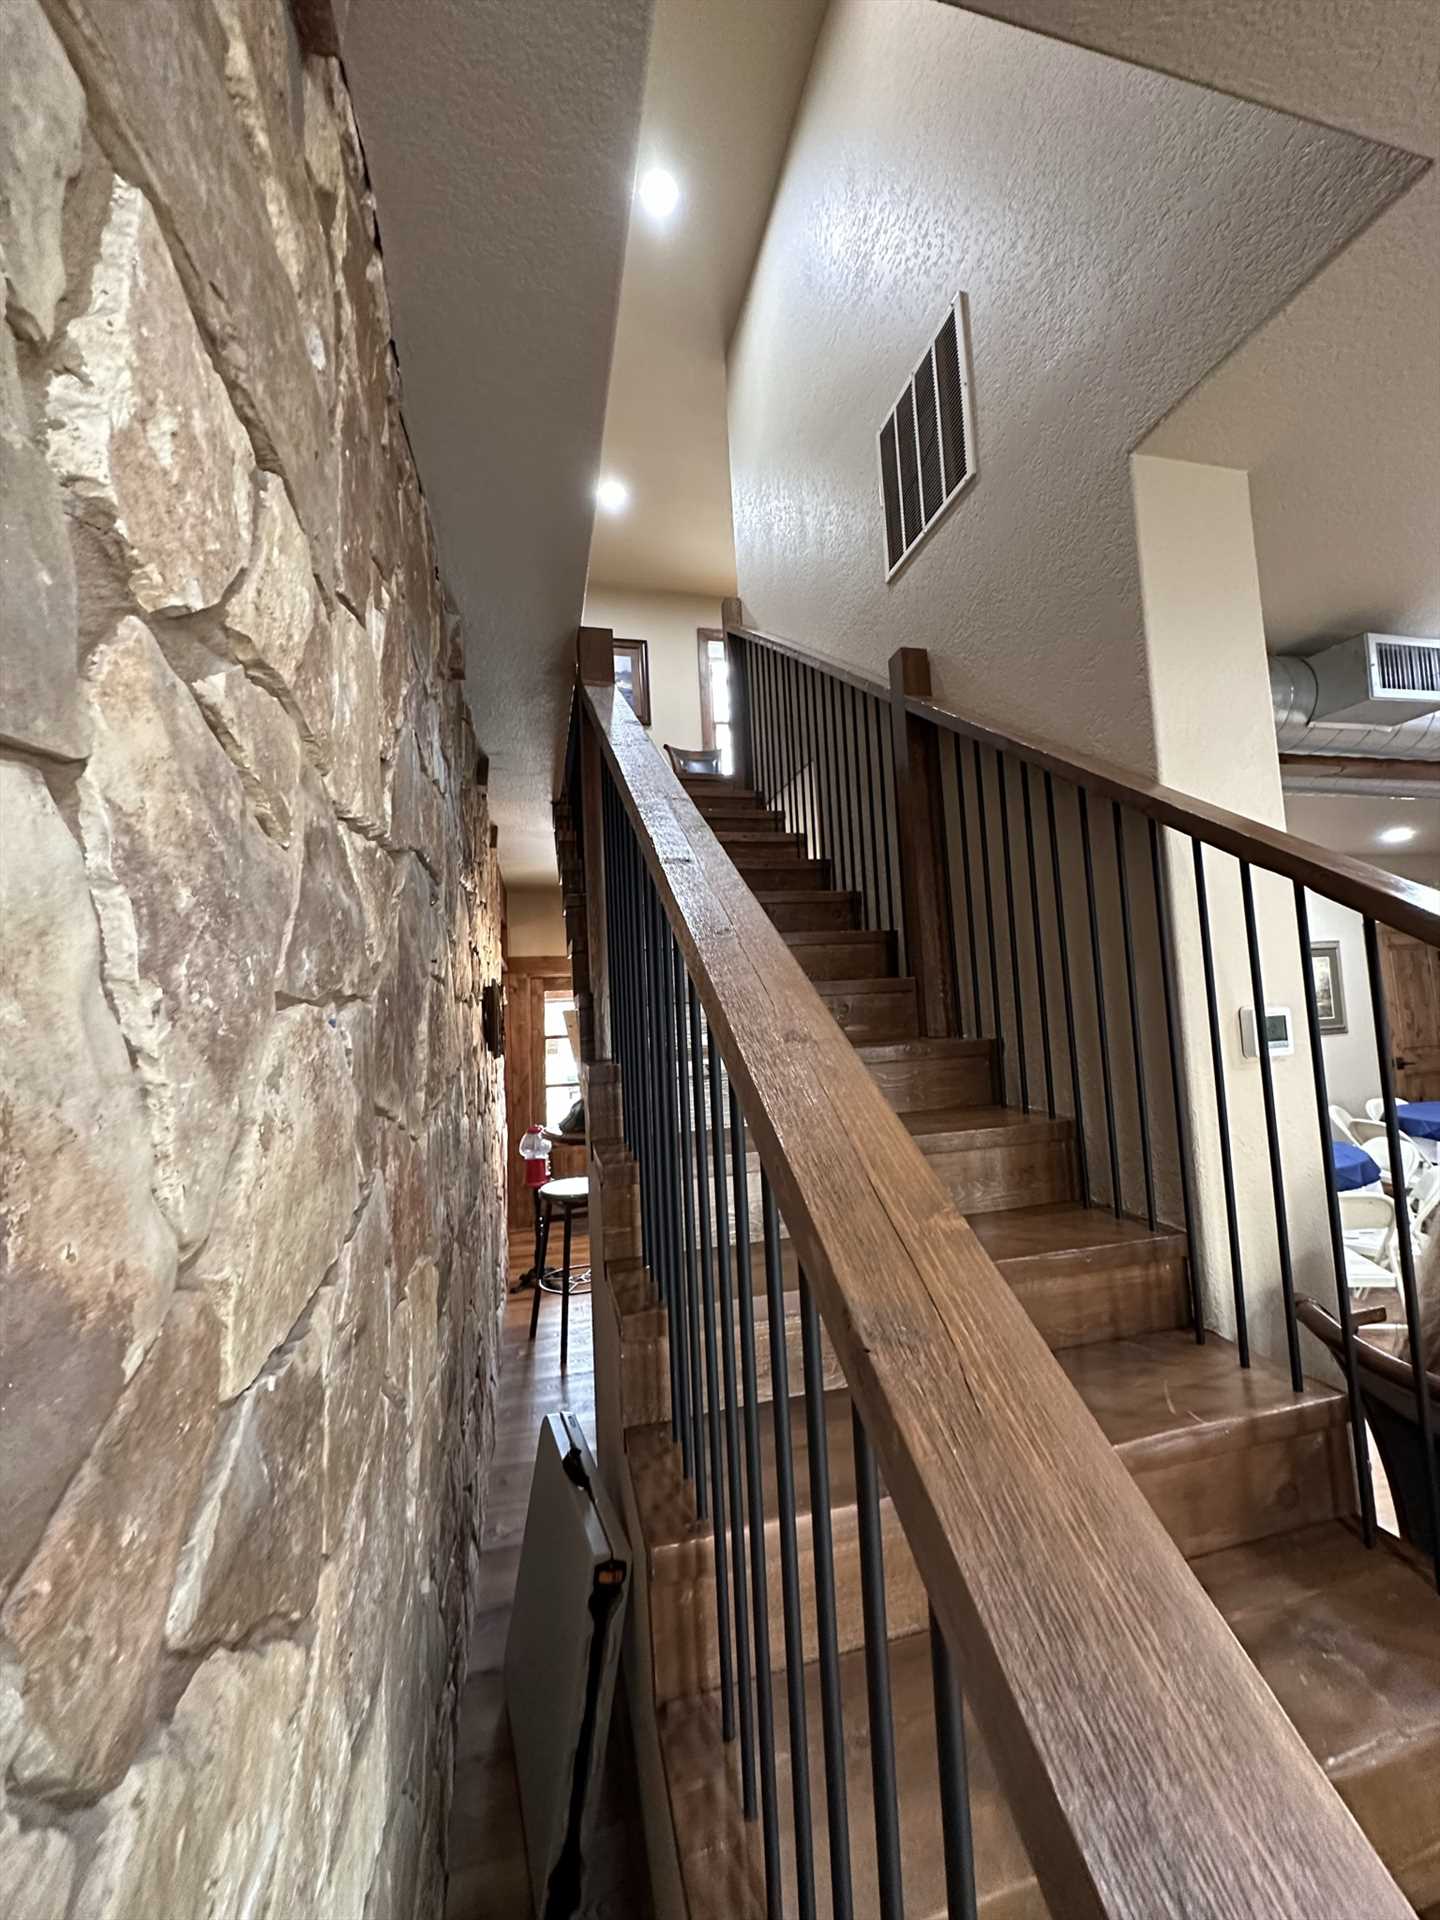                                                 The den, kitchen, and master bedroom suite are downstairs, with four bedrooms and baths upstairs. This view of the staircase also shows the wonderful harmonizing of stone and wood work details in the Lodge!